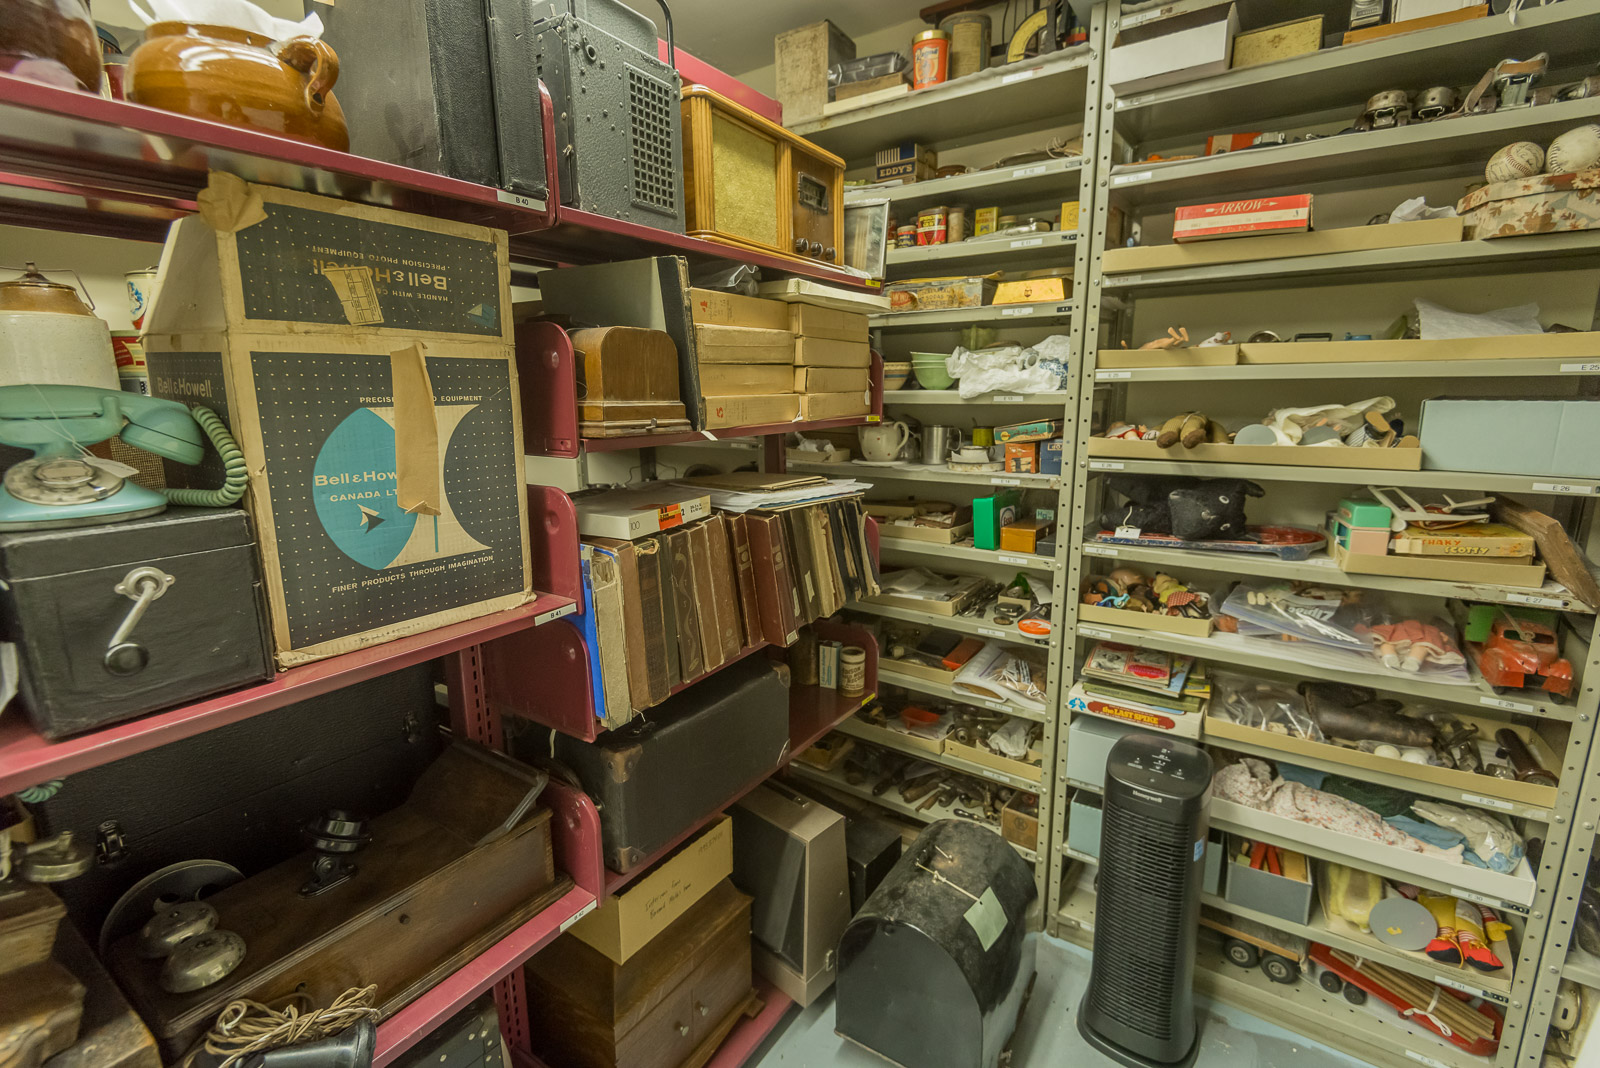 Collection storage located in the basement of the museum